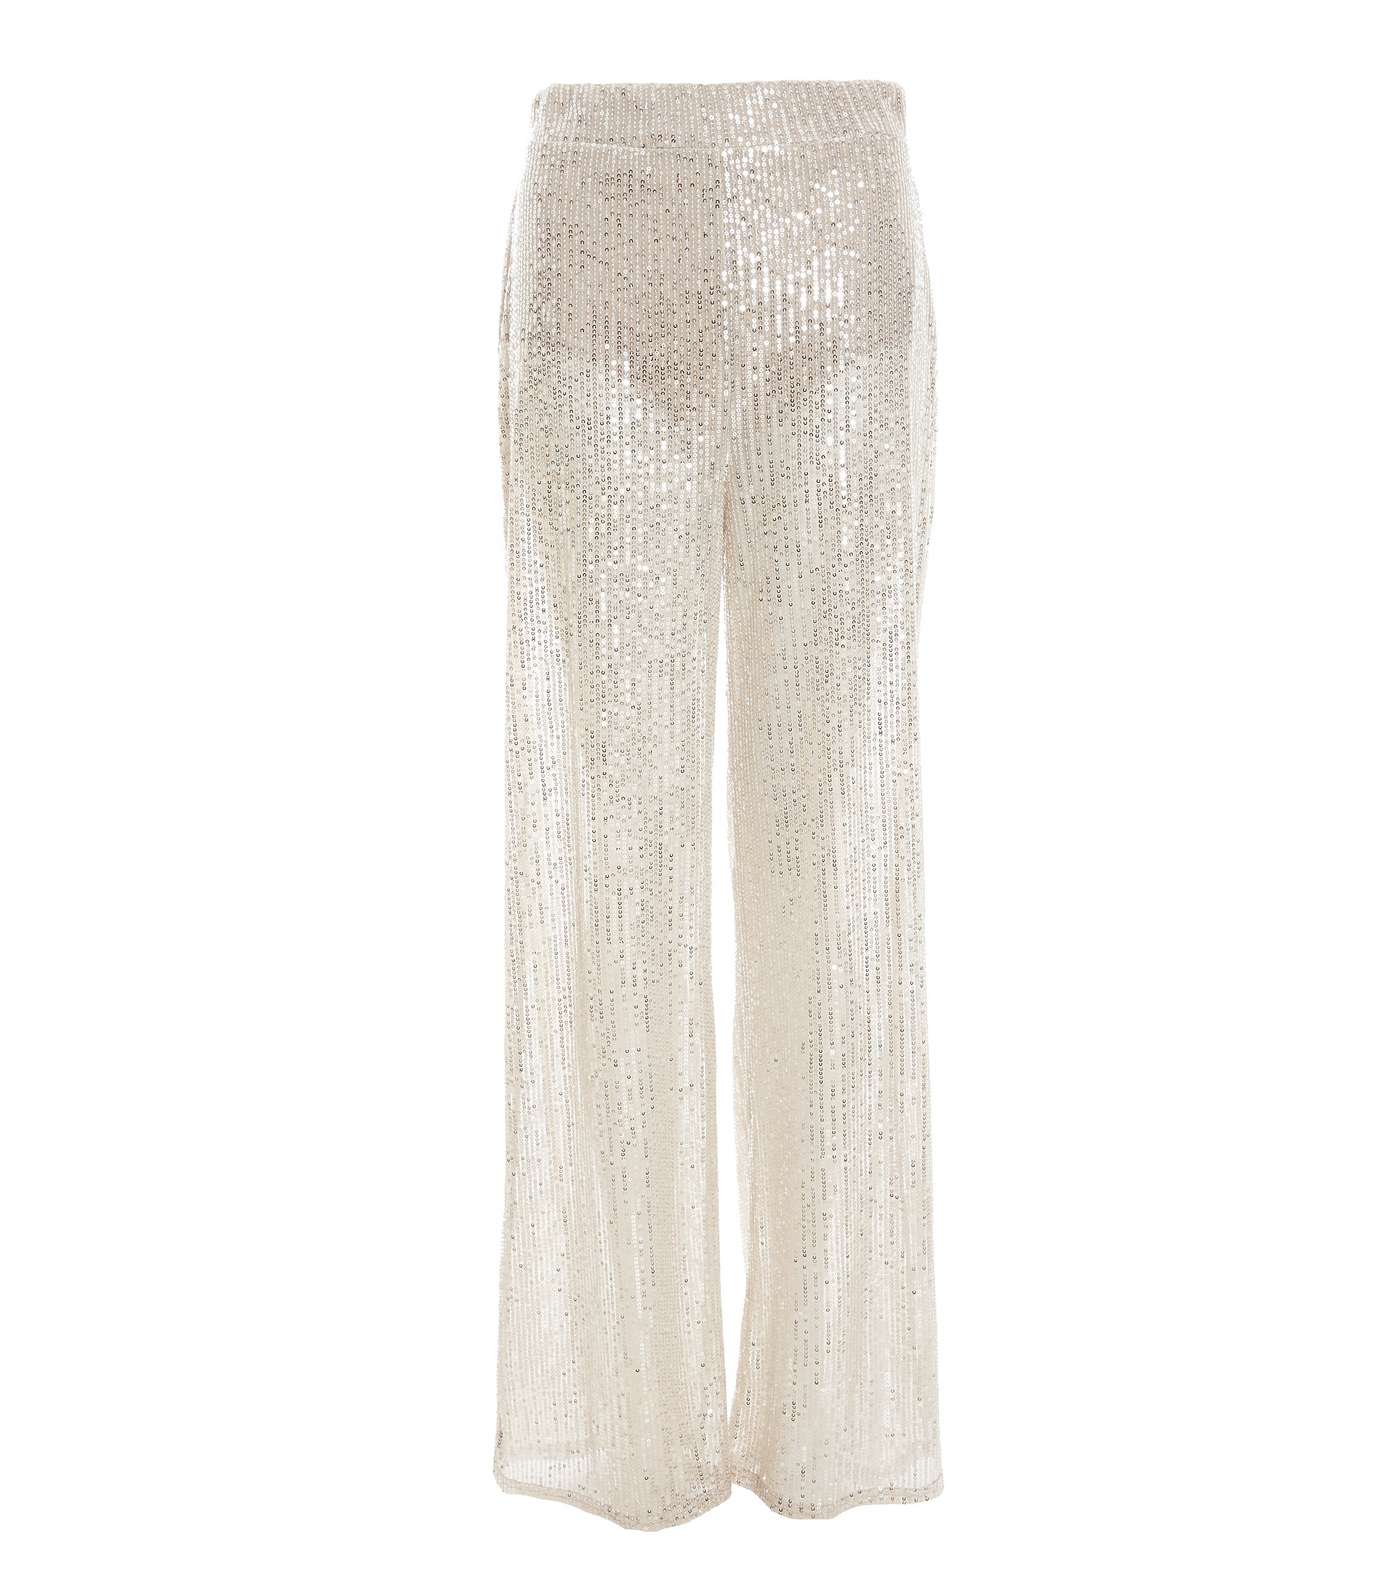 QUIZ Off White Sequin High Waist Wide Leg Trousers Image 4